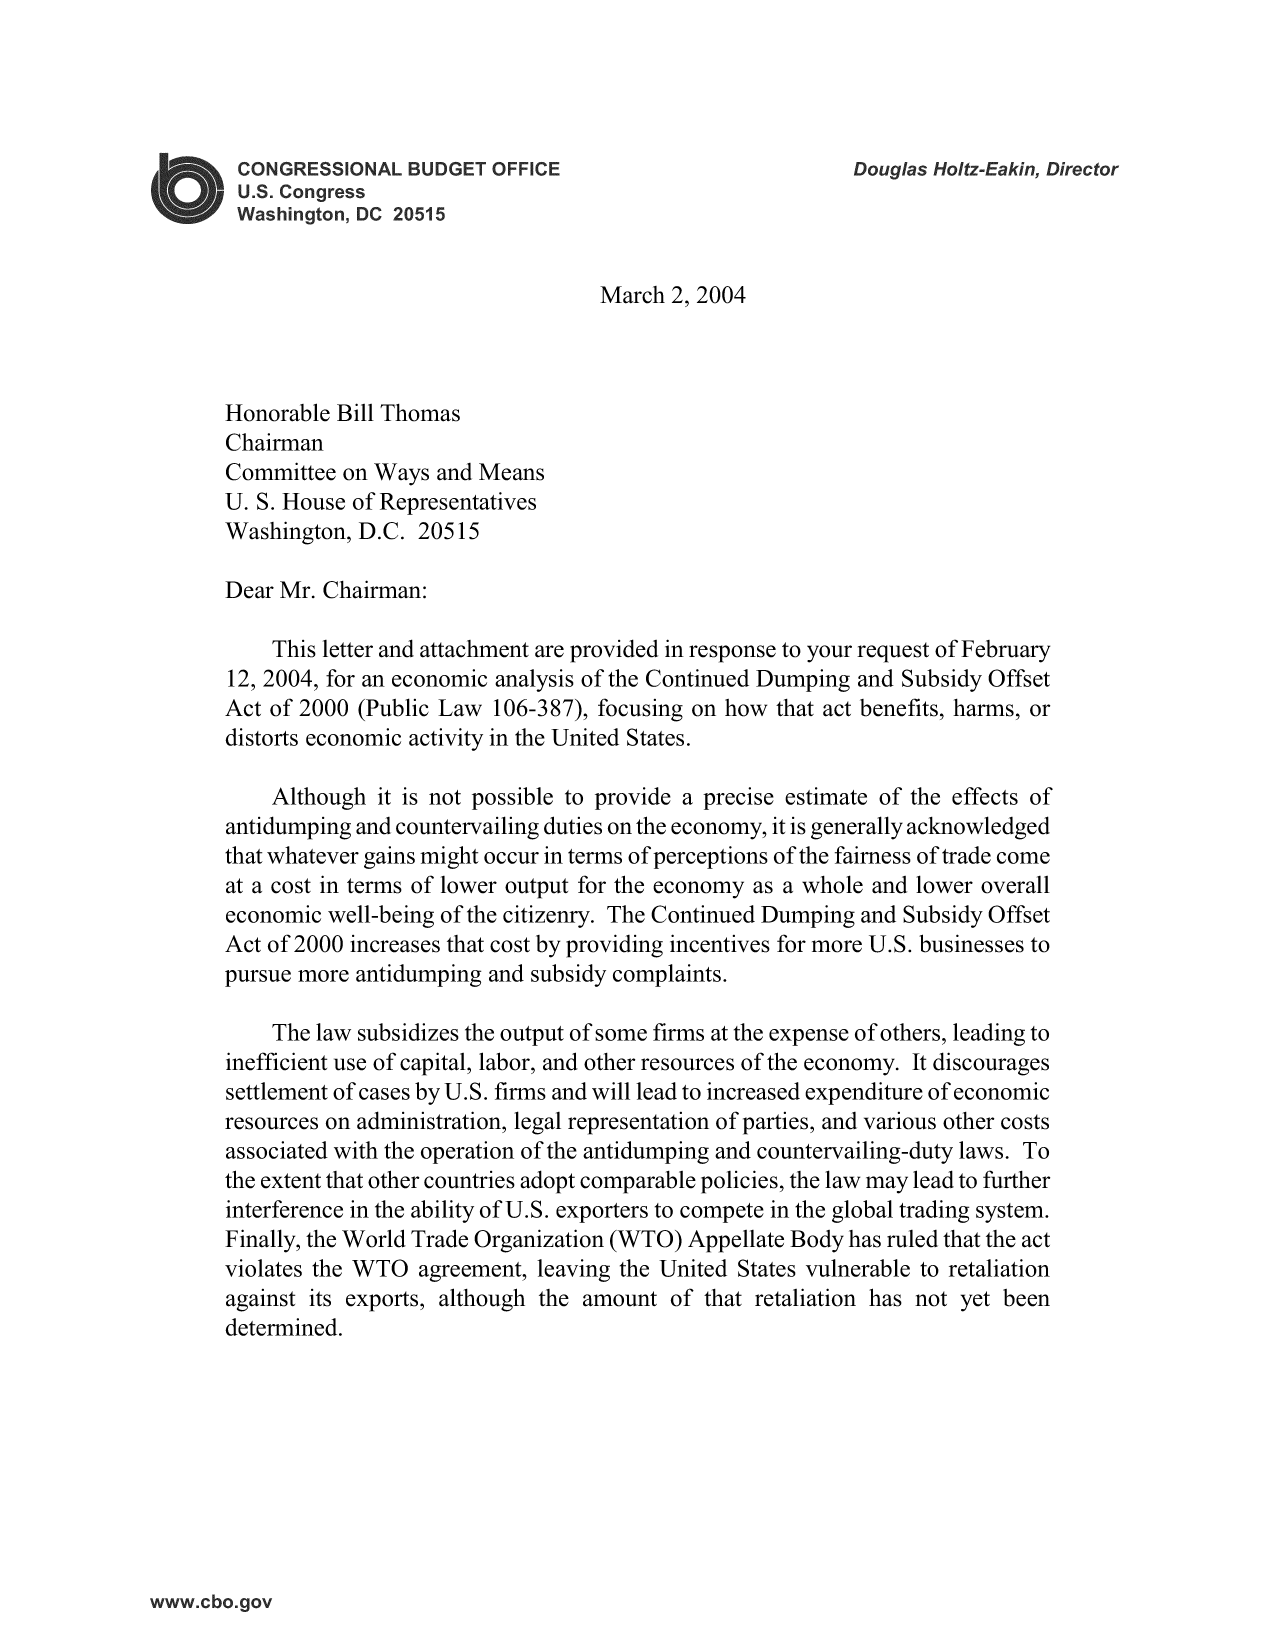 handle is hein.congrec/cbo9475 and id is 1 raw text is: March 2, 2004

Honorable Bill Thomas
Chairman
Committee on Ways and Means
U. S. House of Representatives
Washington, D.C. 20515
Dear Mr. Chairman:
This letter and attachment are provided in response to your request of February
12, 2004, for an economic analysis of the Continued Dumping and Subsidy Offset
Act of 2000 (Public Law 106-387), focusing on how that act benefits, harms, or
distorts economic activity in the United States.
Although it is not possible to provide a precise estimate of the effects of
antidumping and countervailing duties on the economy, it is generally acknowledged
that whatever gains might occur in terms of perceptions of the fairness of trade come
at a cost in terms of lower output for the economy as a whole and lower overall
economic well-being of the citizenry. The Continued Dumping and Subsidy Offset
Act of 2000 increases that cost by providing incentives for more U.S. businesses to
pursue more antidumping and subsidy complaints.
The law subsidizes the output of some firms at the expense of others, leading to
inefficient use of capital, labor, and other resources of the economy. It discourages
settlement of cases by U.S. firms and will lead to increased expenditure of economic
resources on administration, legal representation of parties, and various other costs
associated with the operation of the antidumping and countervailing-duty laws. To
the extent that other countries adopt comparable policies, the law may lead to further
interference in the ability of U.S. exporters to compete in the global trading system.
Finally, the World Trade Organization (WTO) Appellate Body has ruled that the act
violates the WTO agreement, leaving the United States vulnerable to retaliation
against its exports, although the amount of that retaliation has not yet been
determined.


